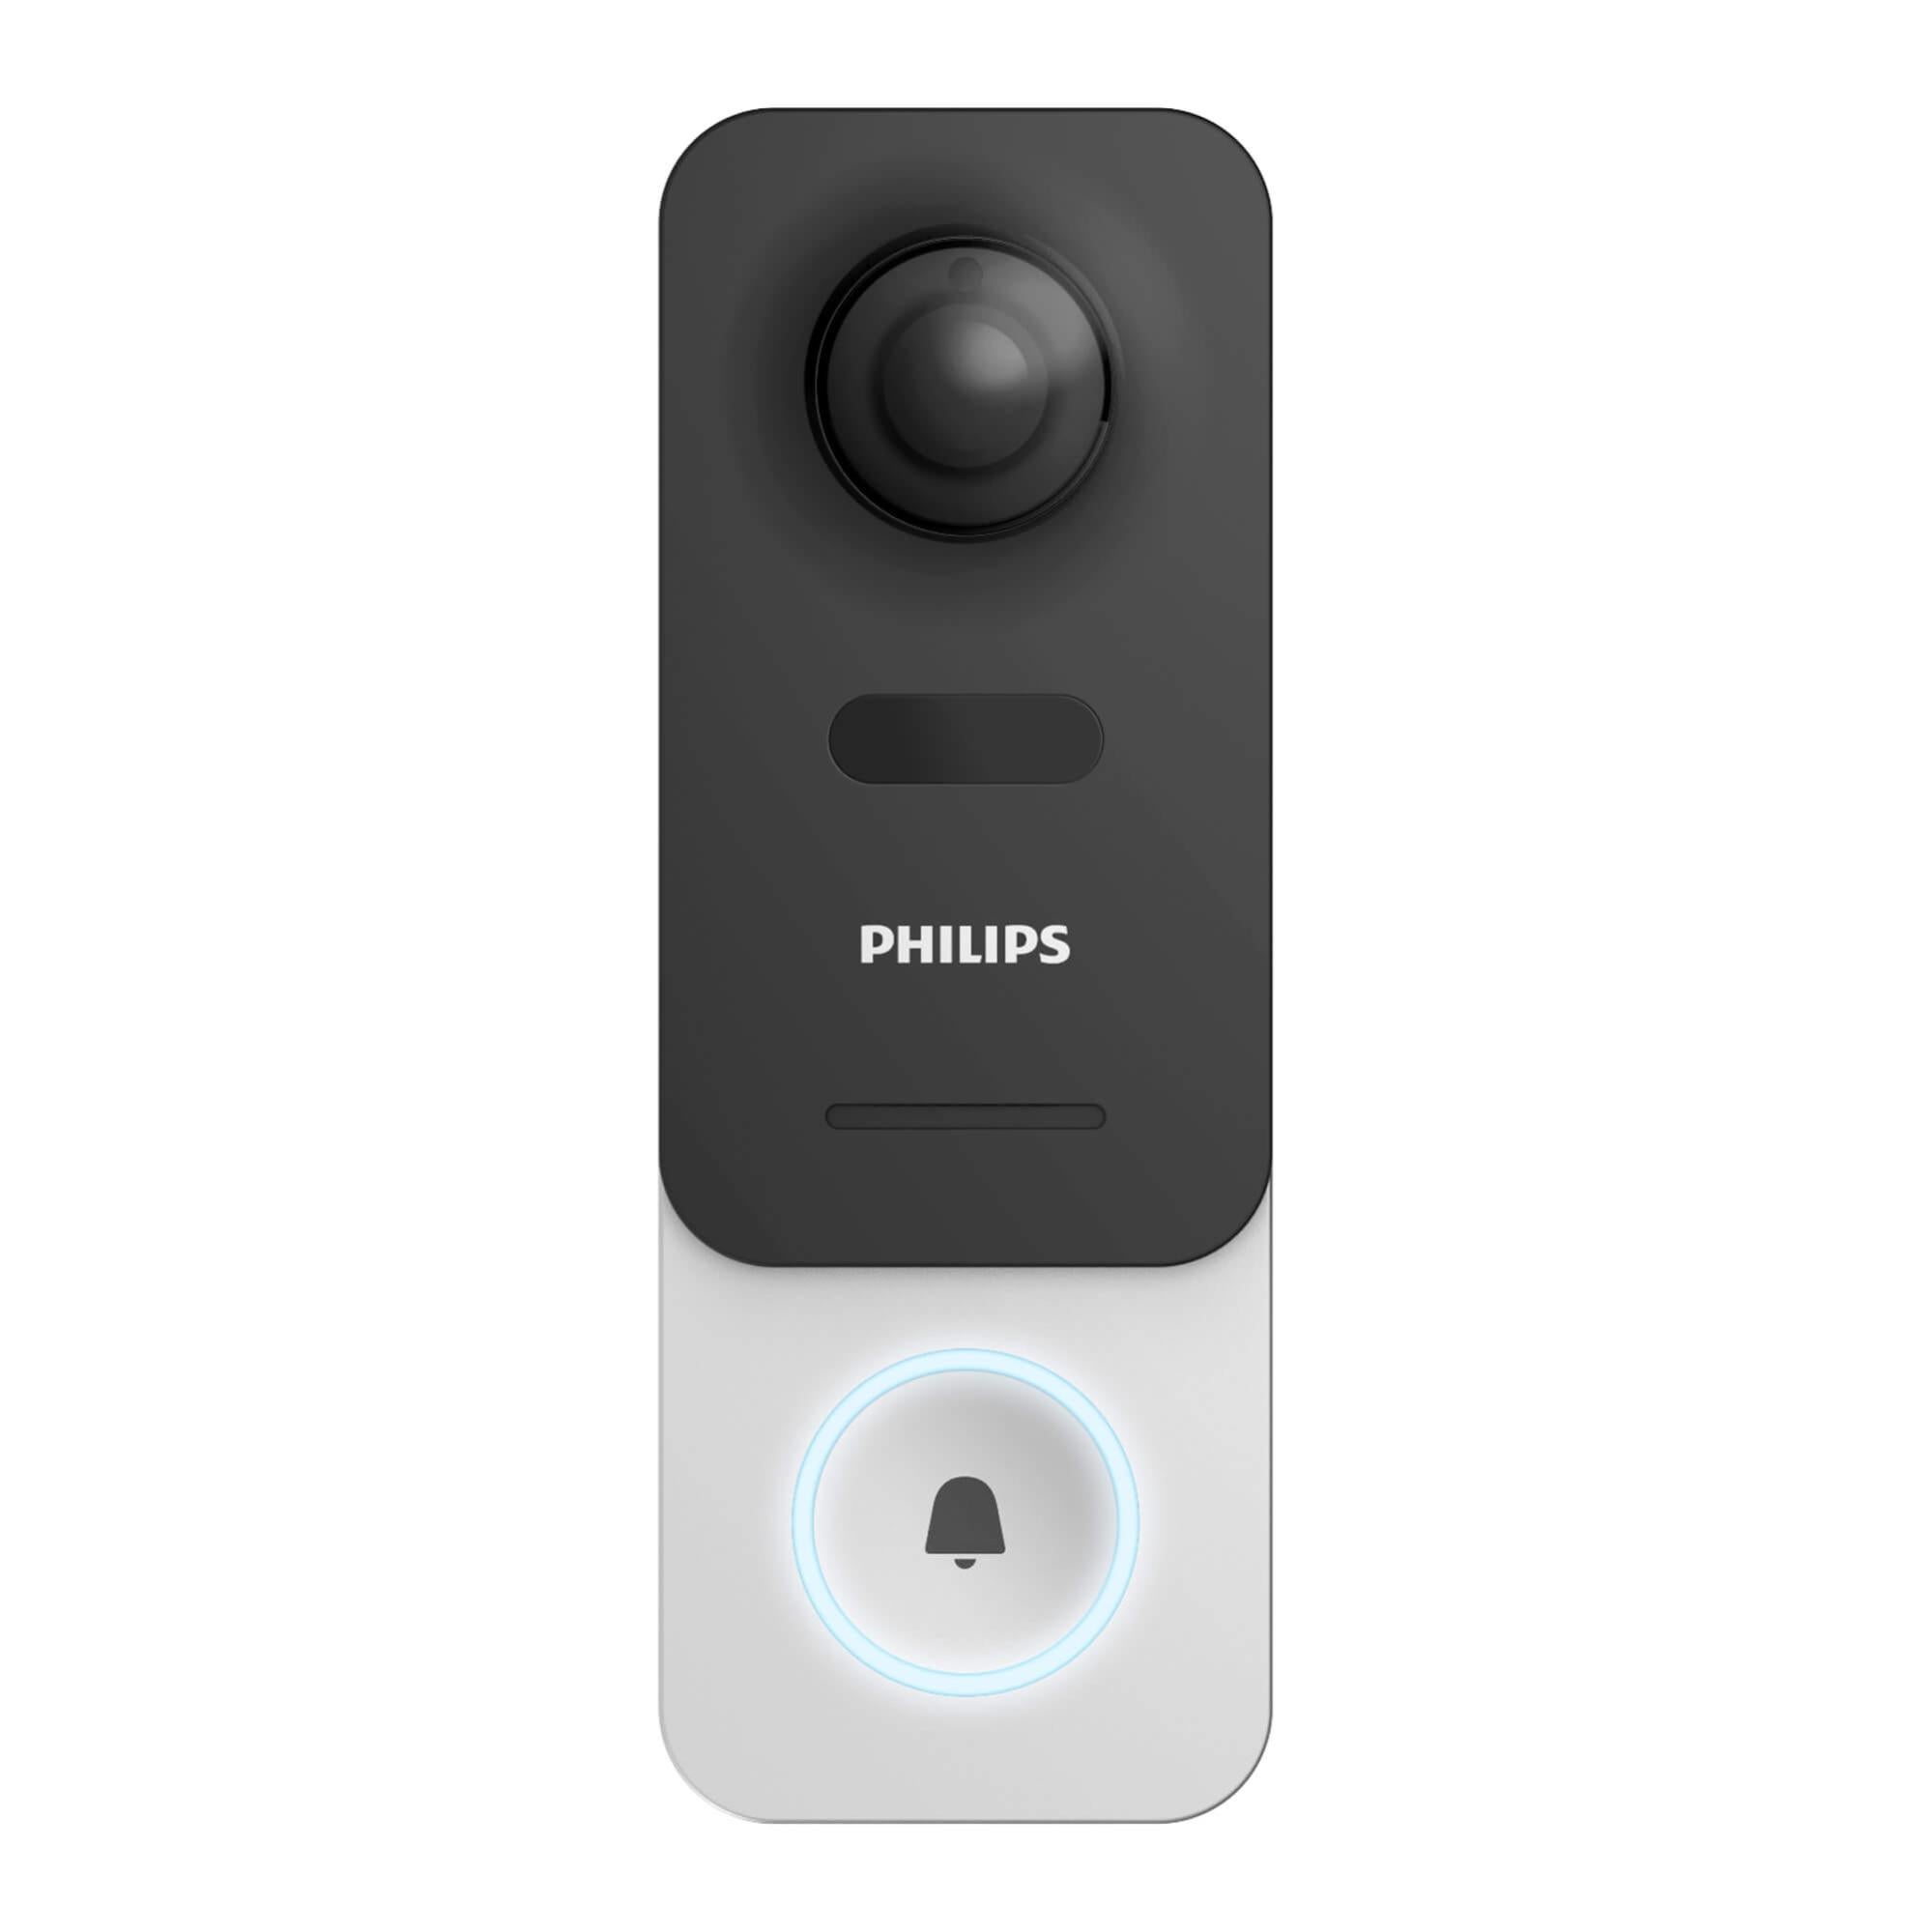 Timbre con video inteligente welcome link philips